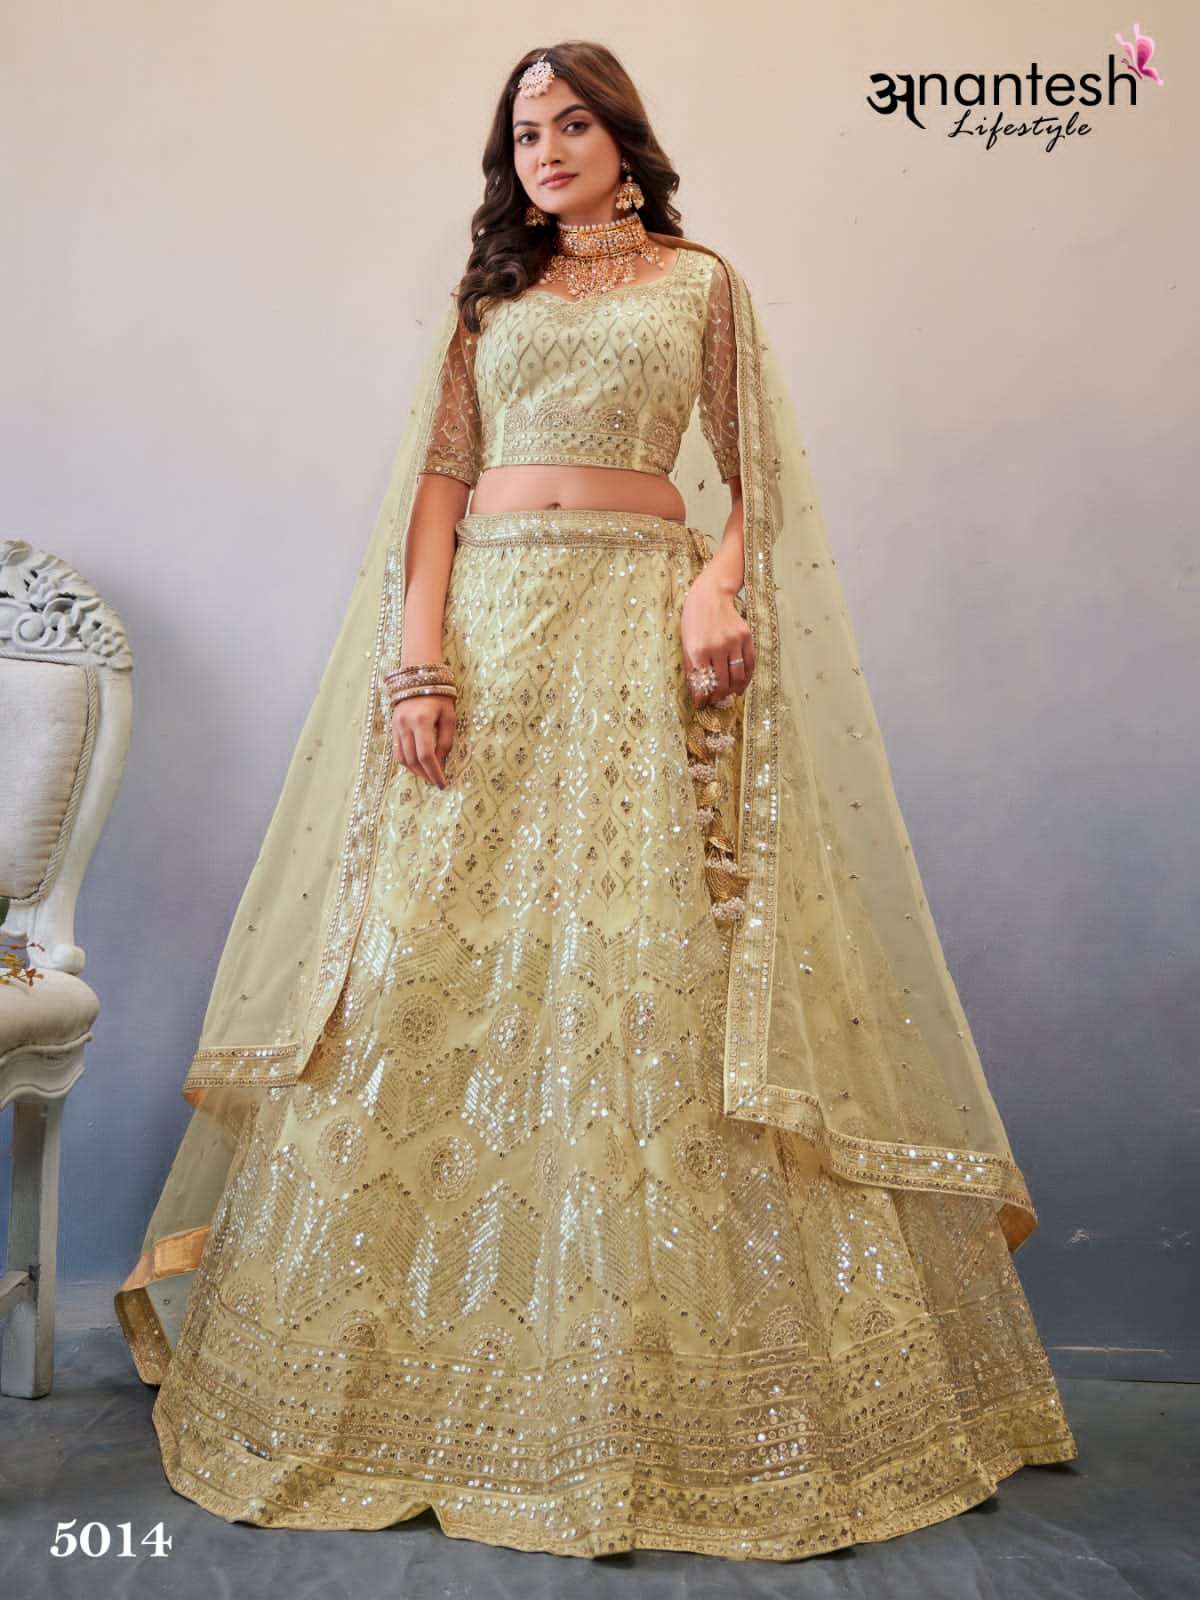 anantesh lifestyle occations vol-4 5012-5016 series party wear lehenga latest catalogue manufacturer surat 